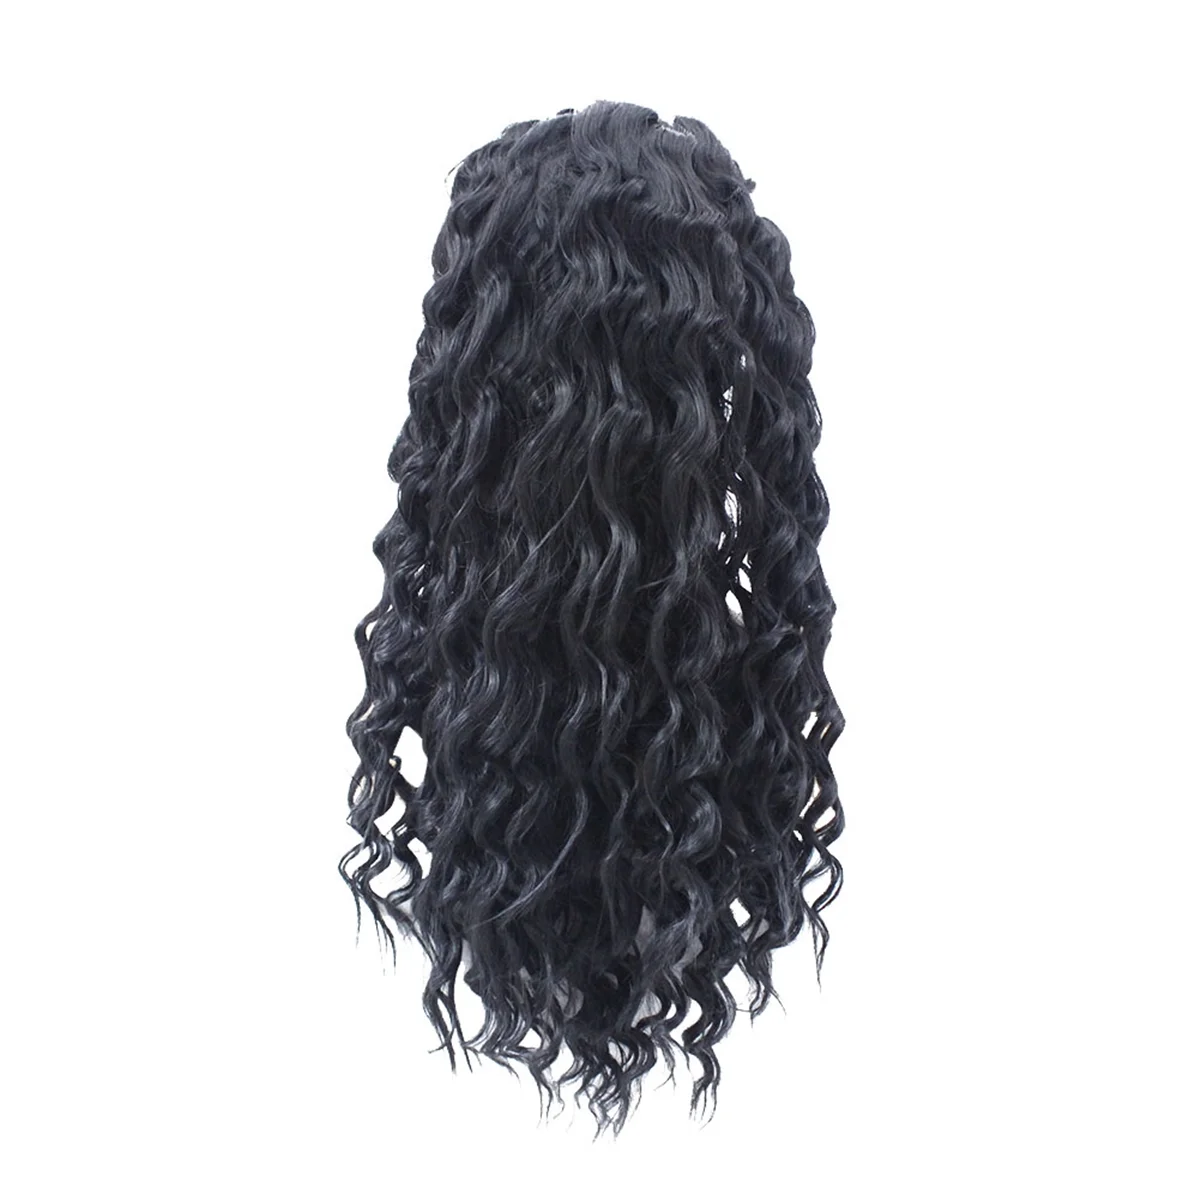 

24 Inches Front Lace Curly Fringe Wig Curly Hair Wigs Brazilian Remy- Curly Human-Hair Wigs for Women